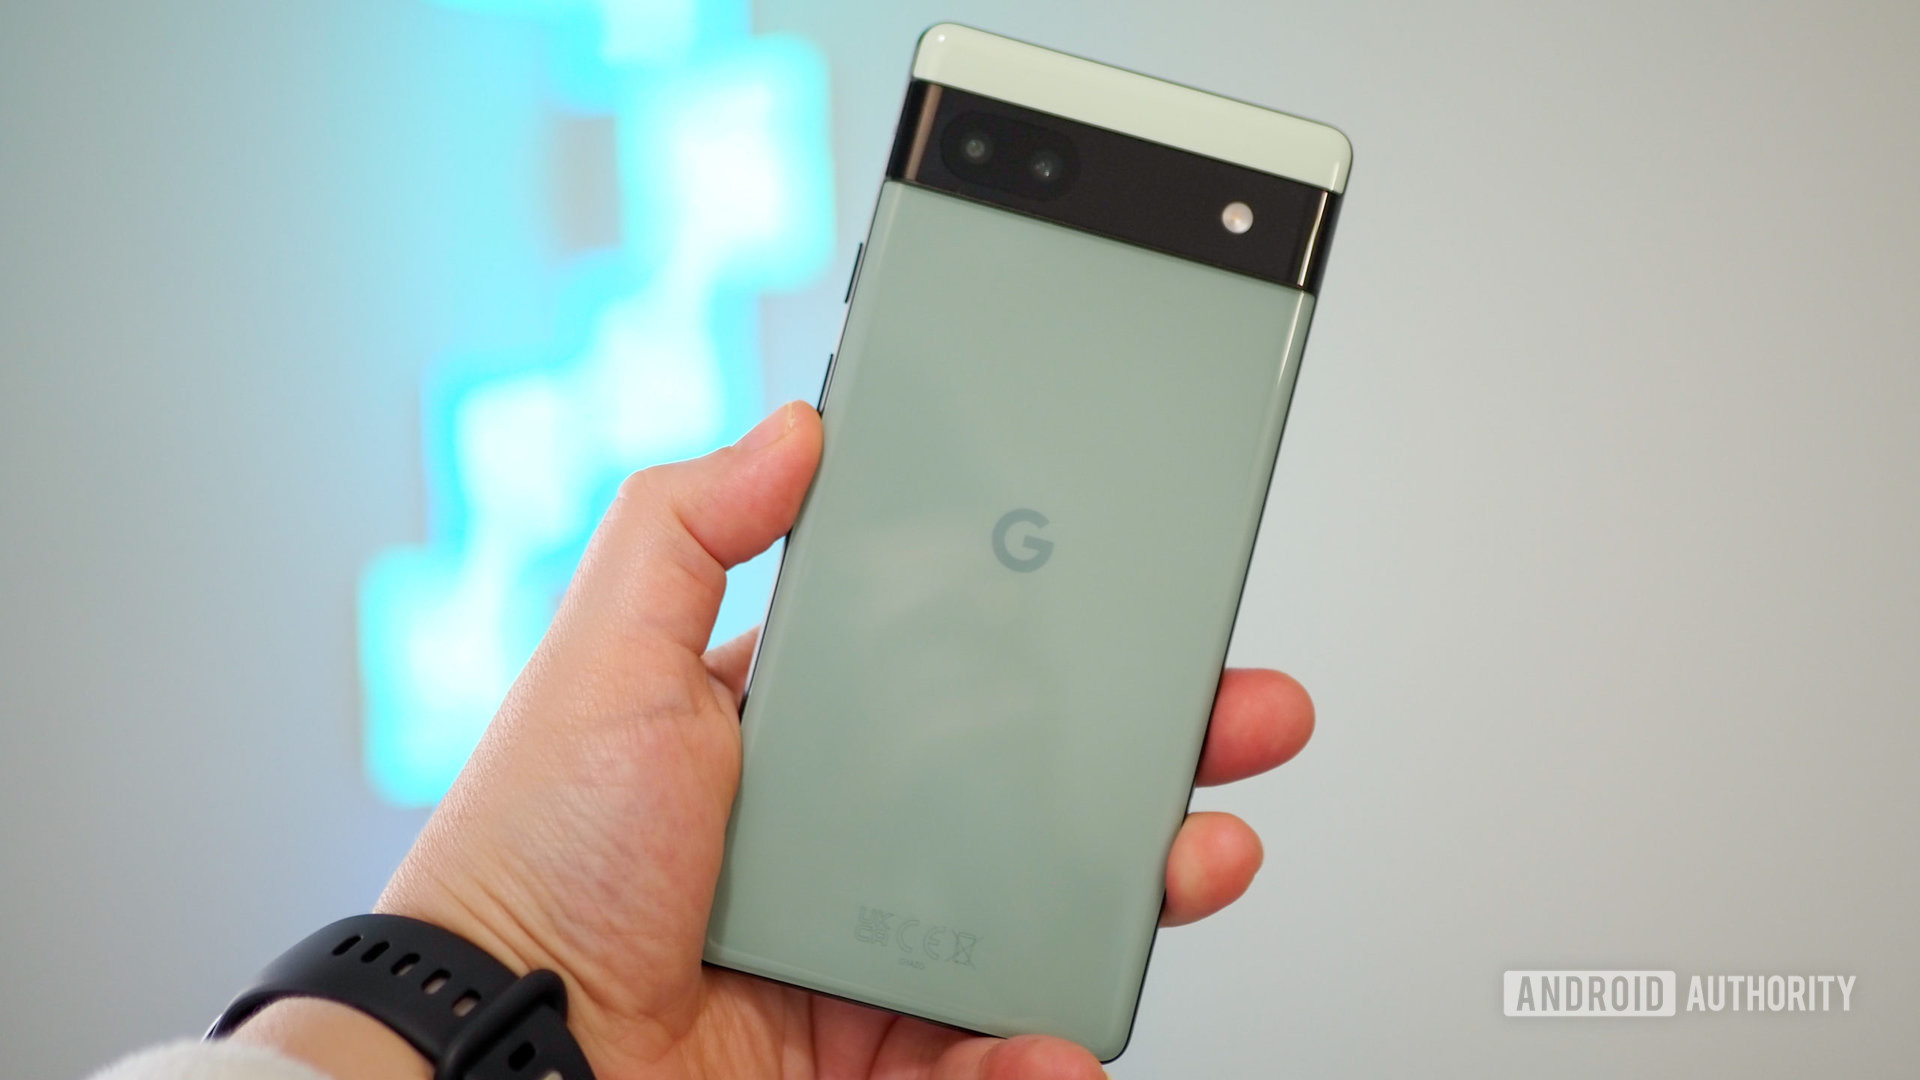 Google Pixel 6a in Sage color in hand, seen from the back